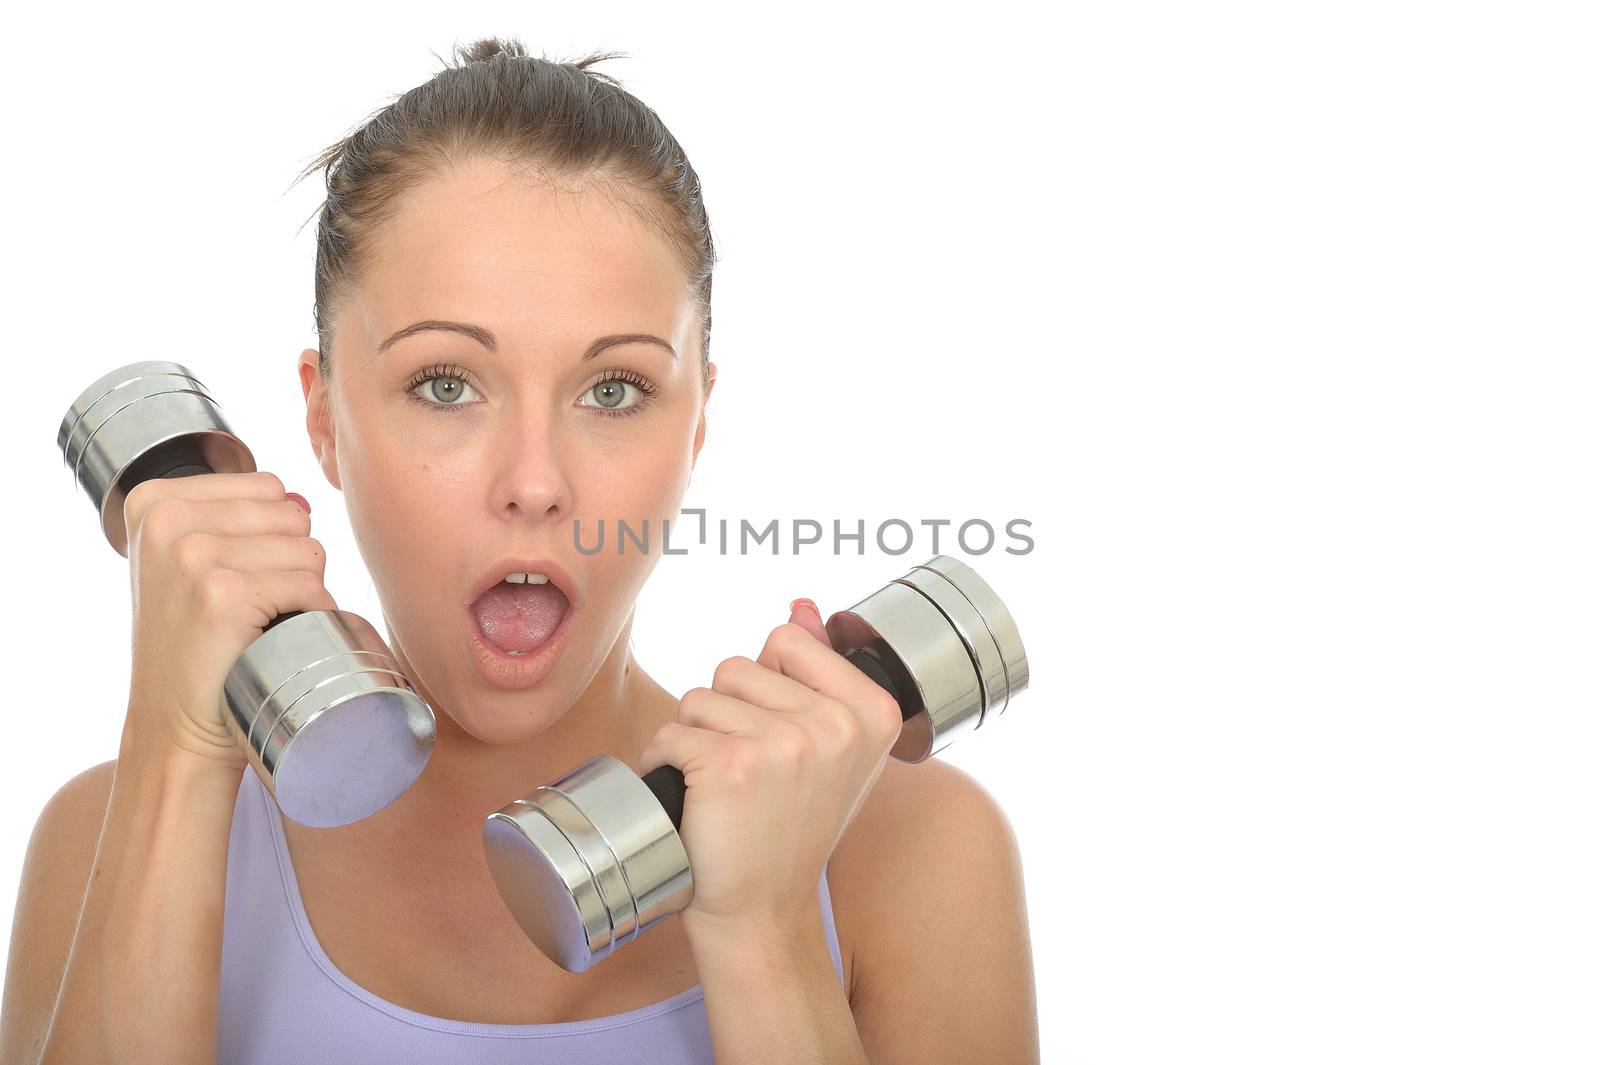 Healthy Young Woman Training With Weights Looking Shocked by Whiteboxmedia